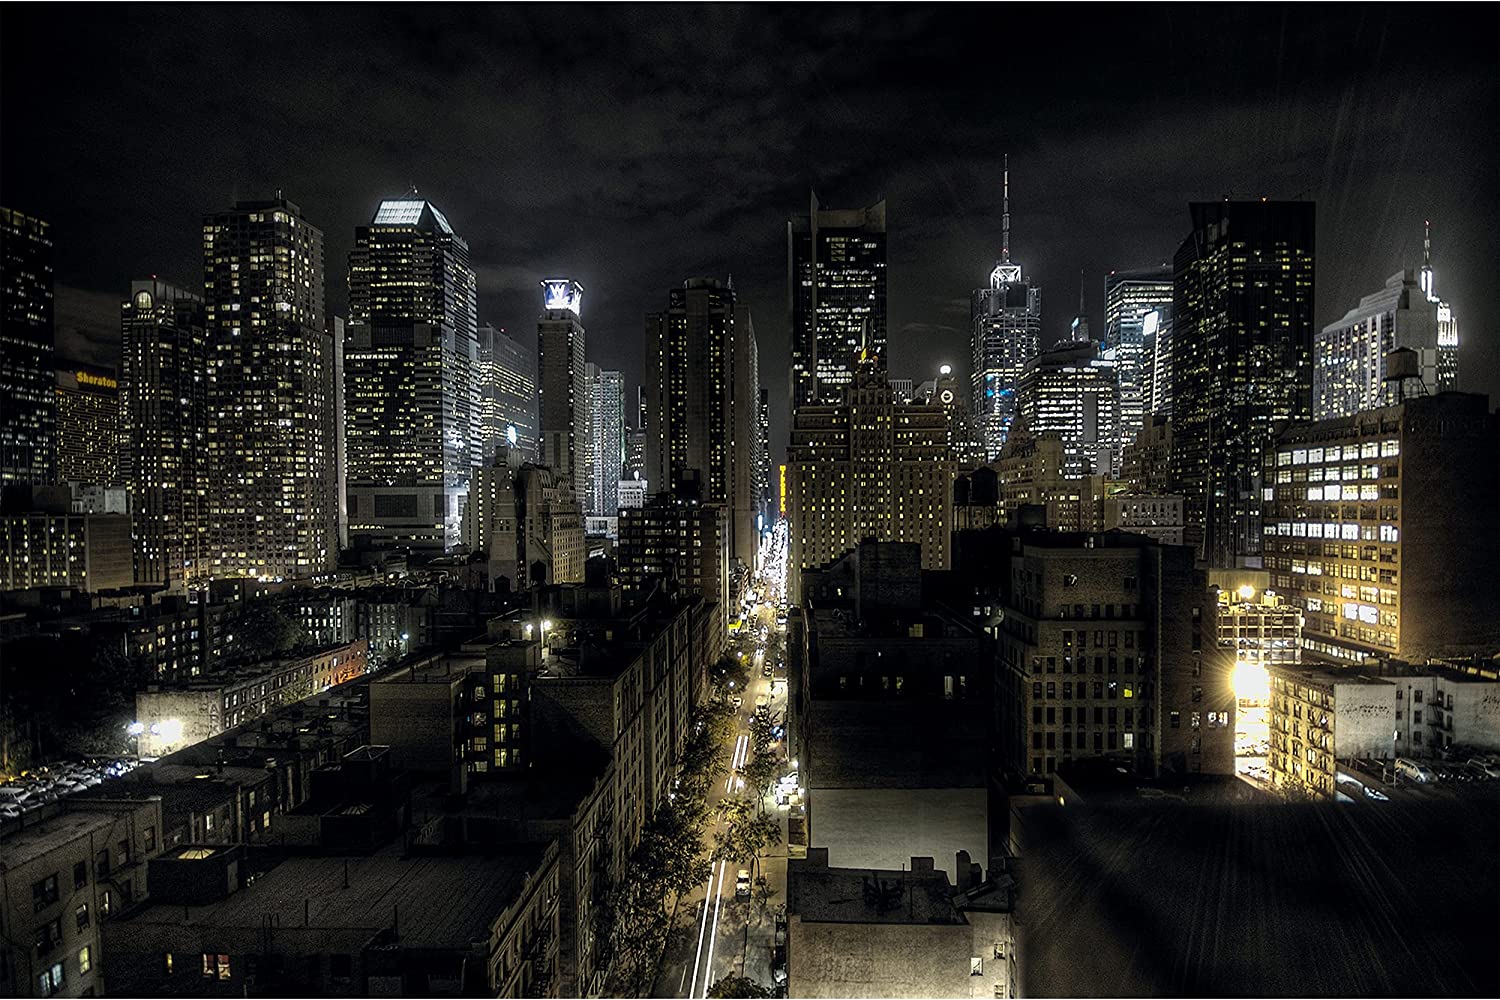 A city at night with many tall buildings - New York